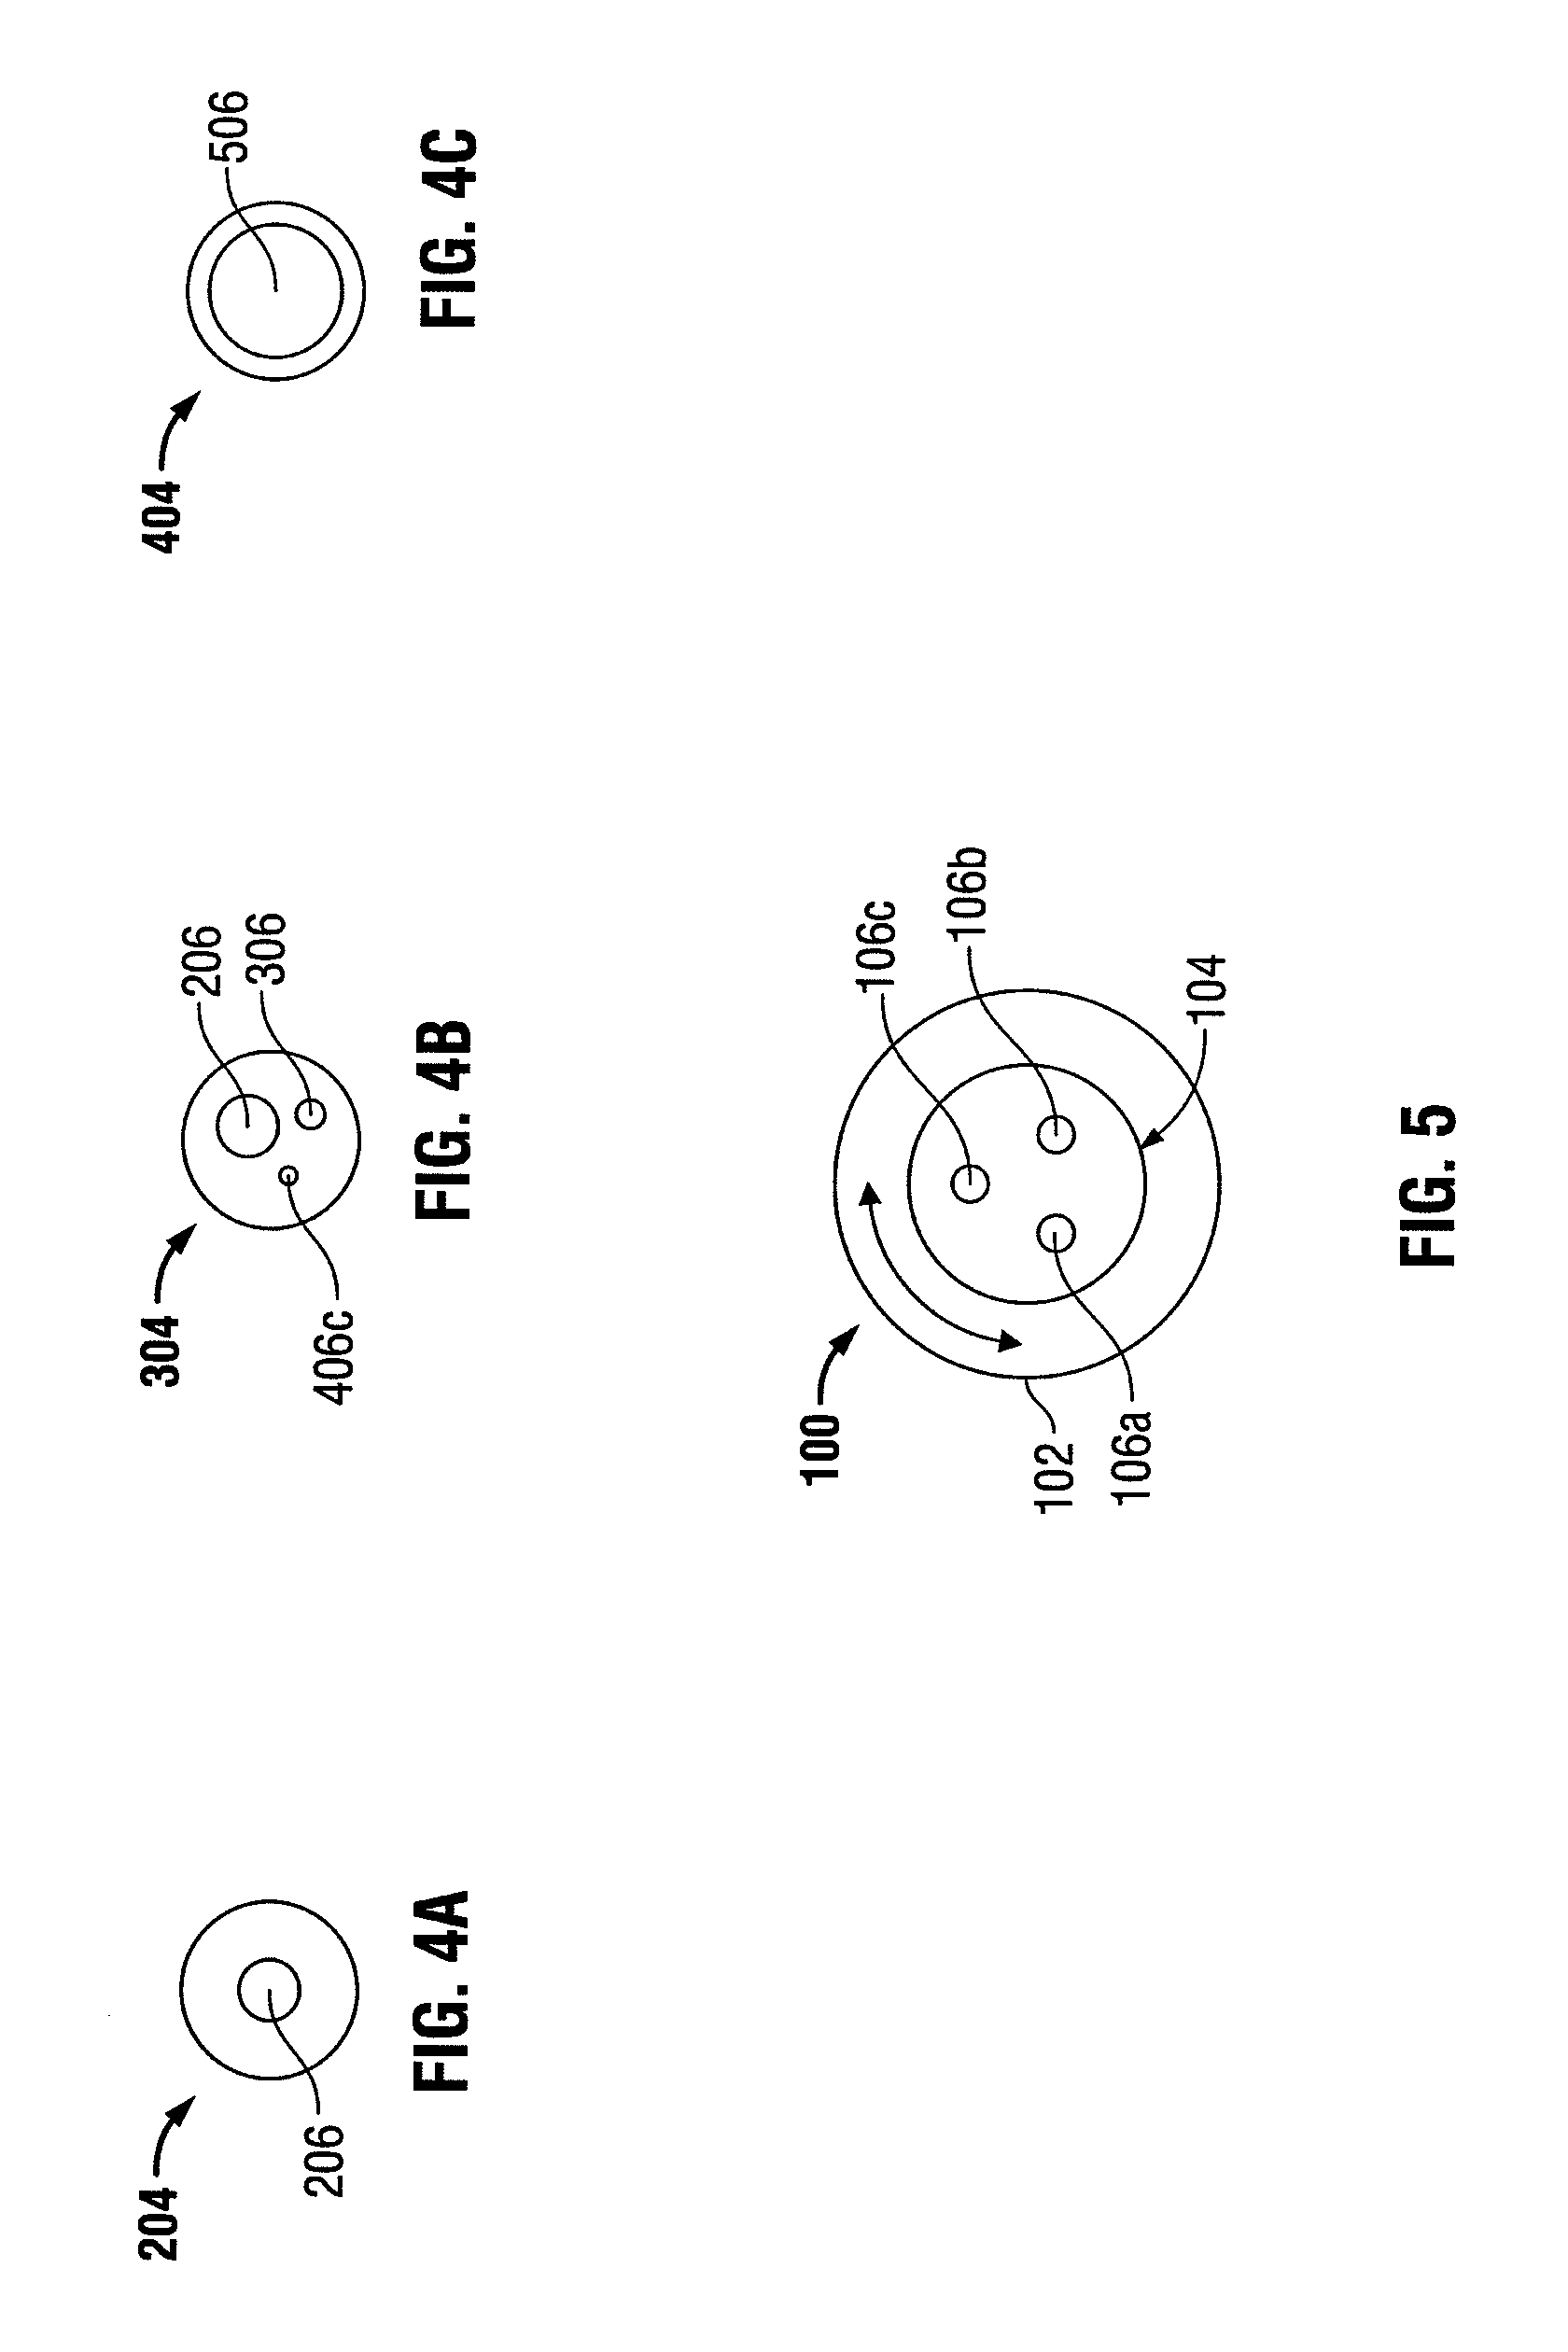 Single incision surgical portal apparatus including inner member